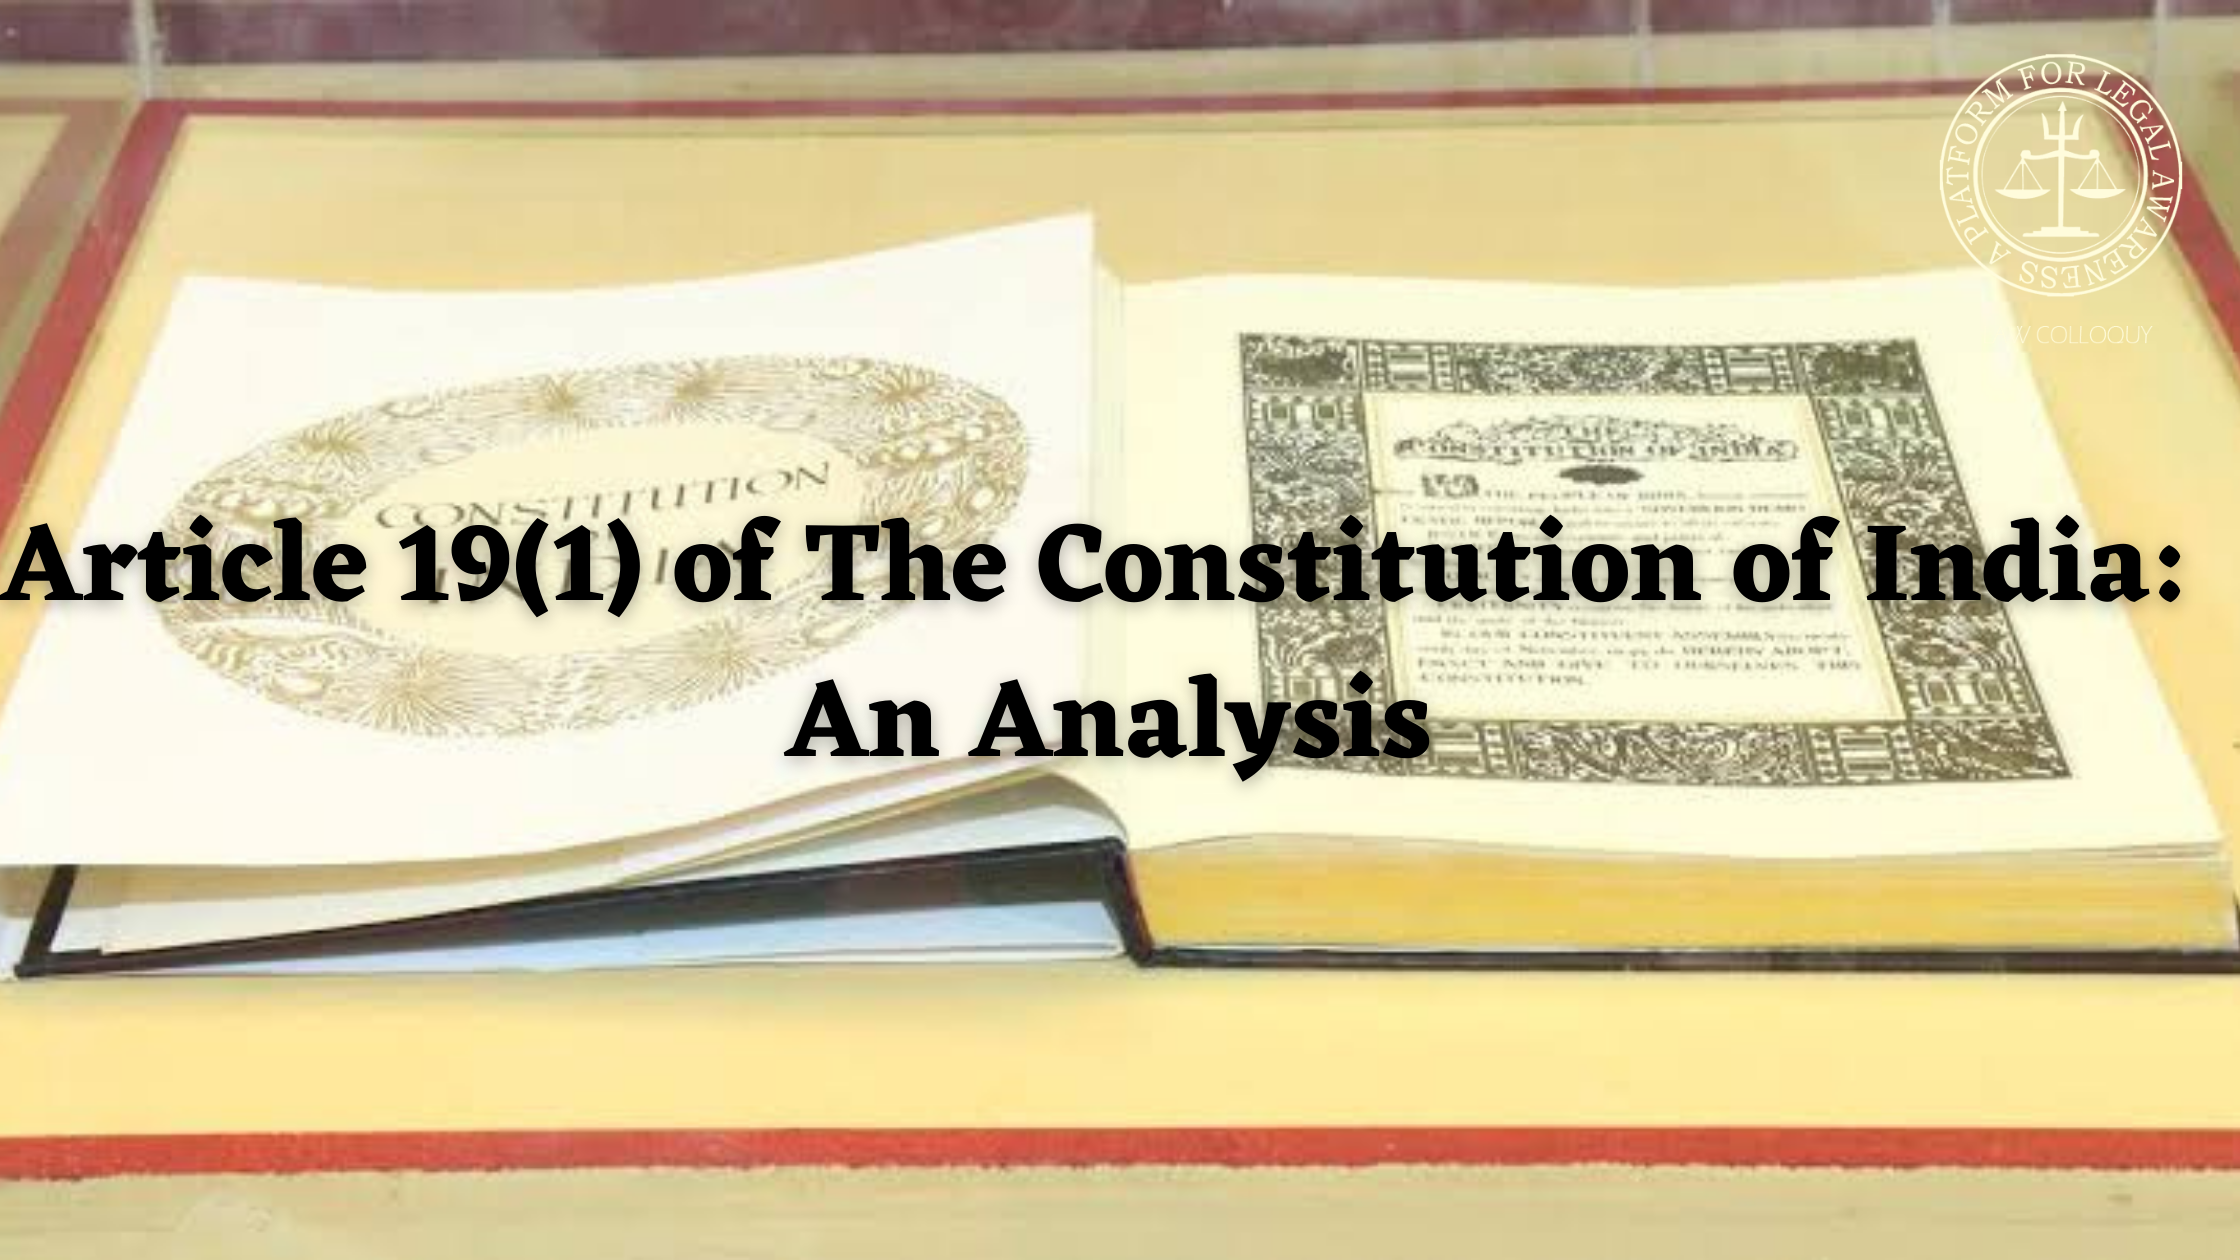 ARTICLE 19(1) OF THE CONSTITUTION OF INDIA: AN ANALYSIS